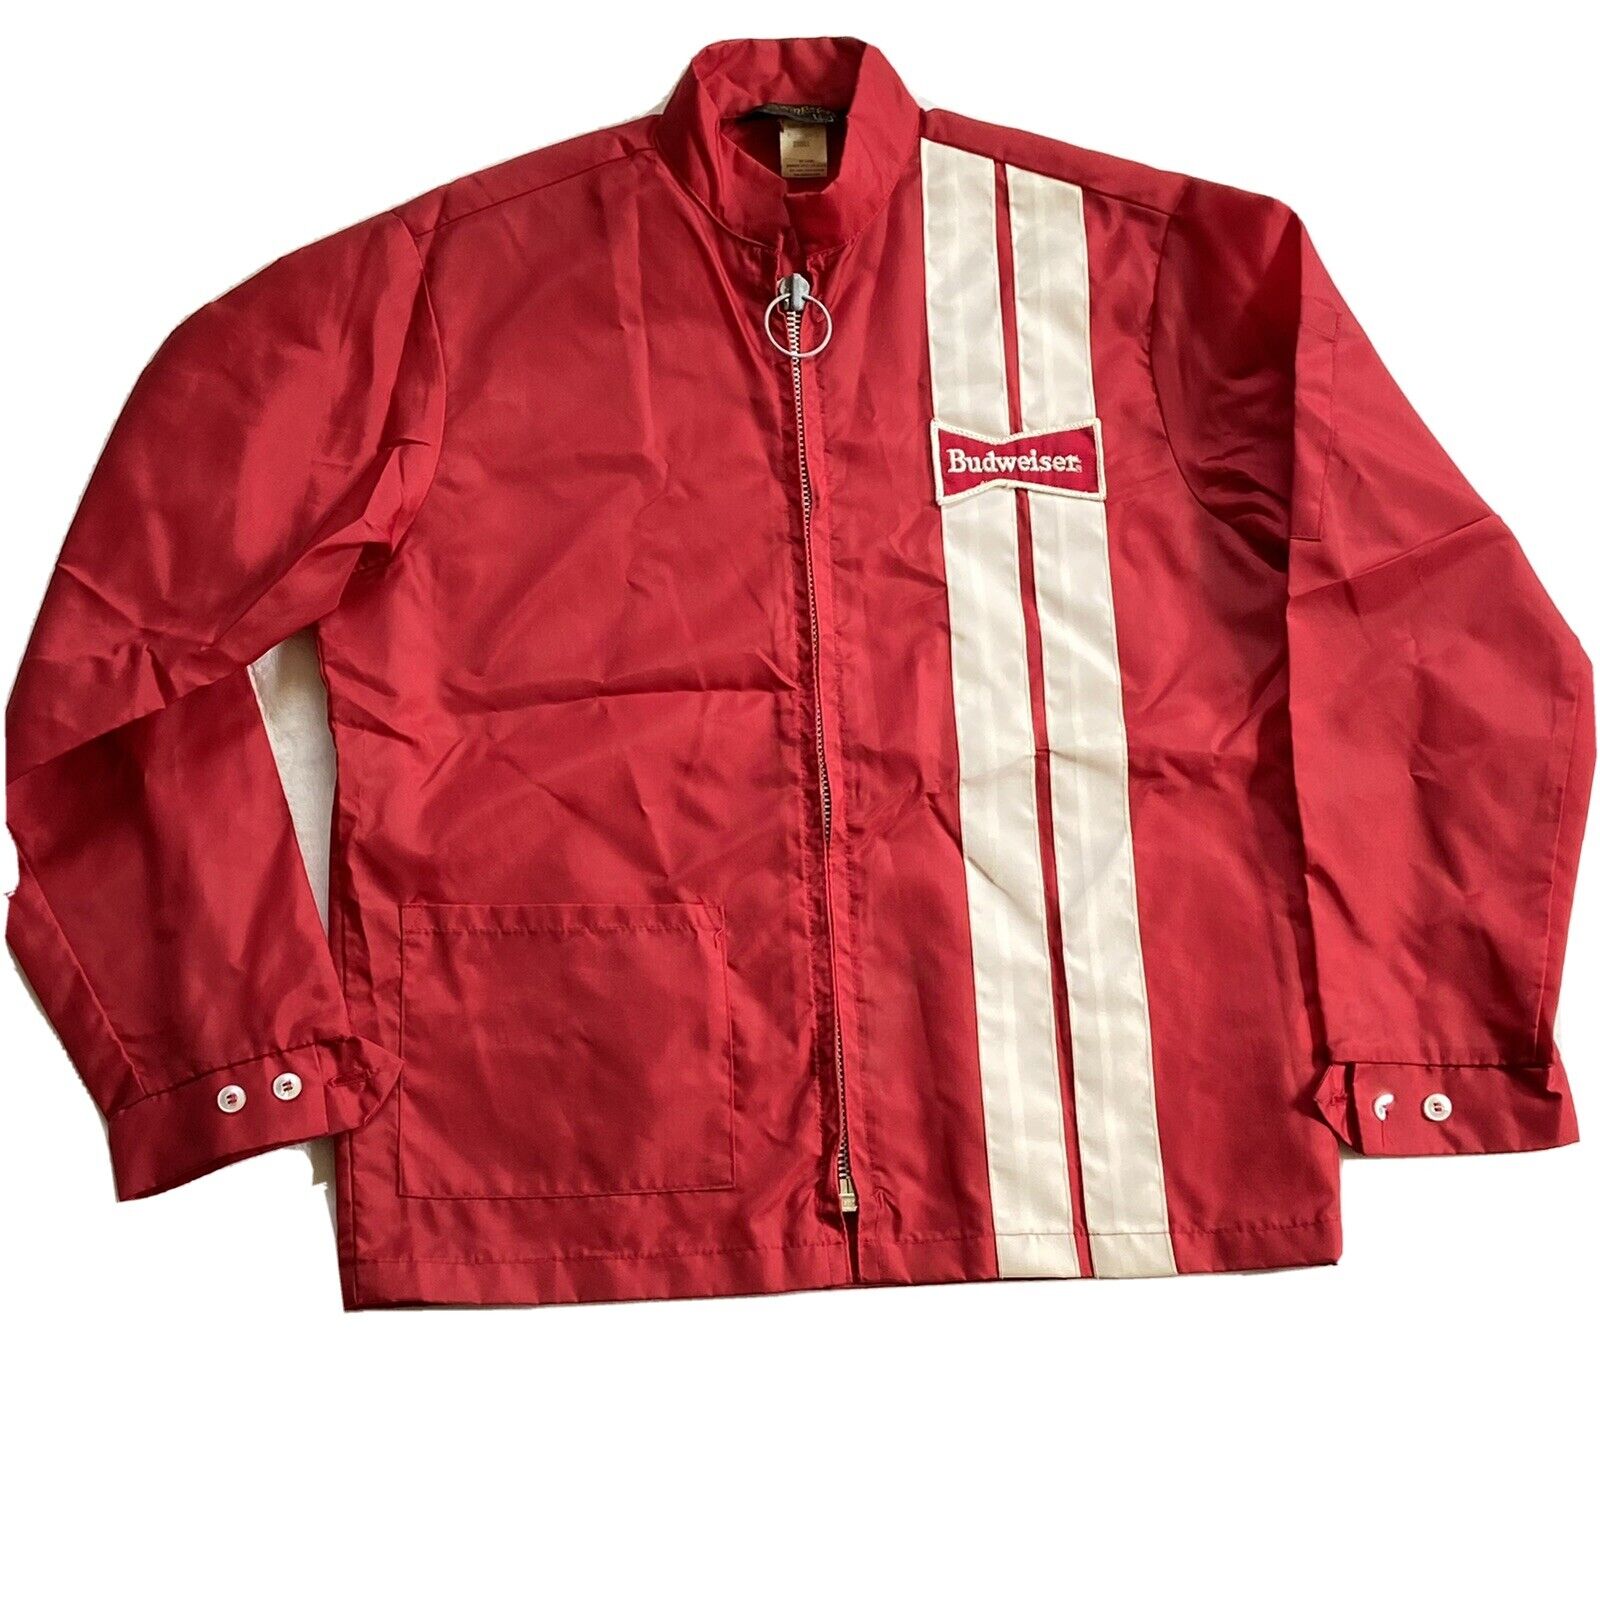 Special Campaign Vintage 70s BUDWEISER Swingster Ranking TOP1 Racing Size Windbreaker Jacket S